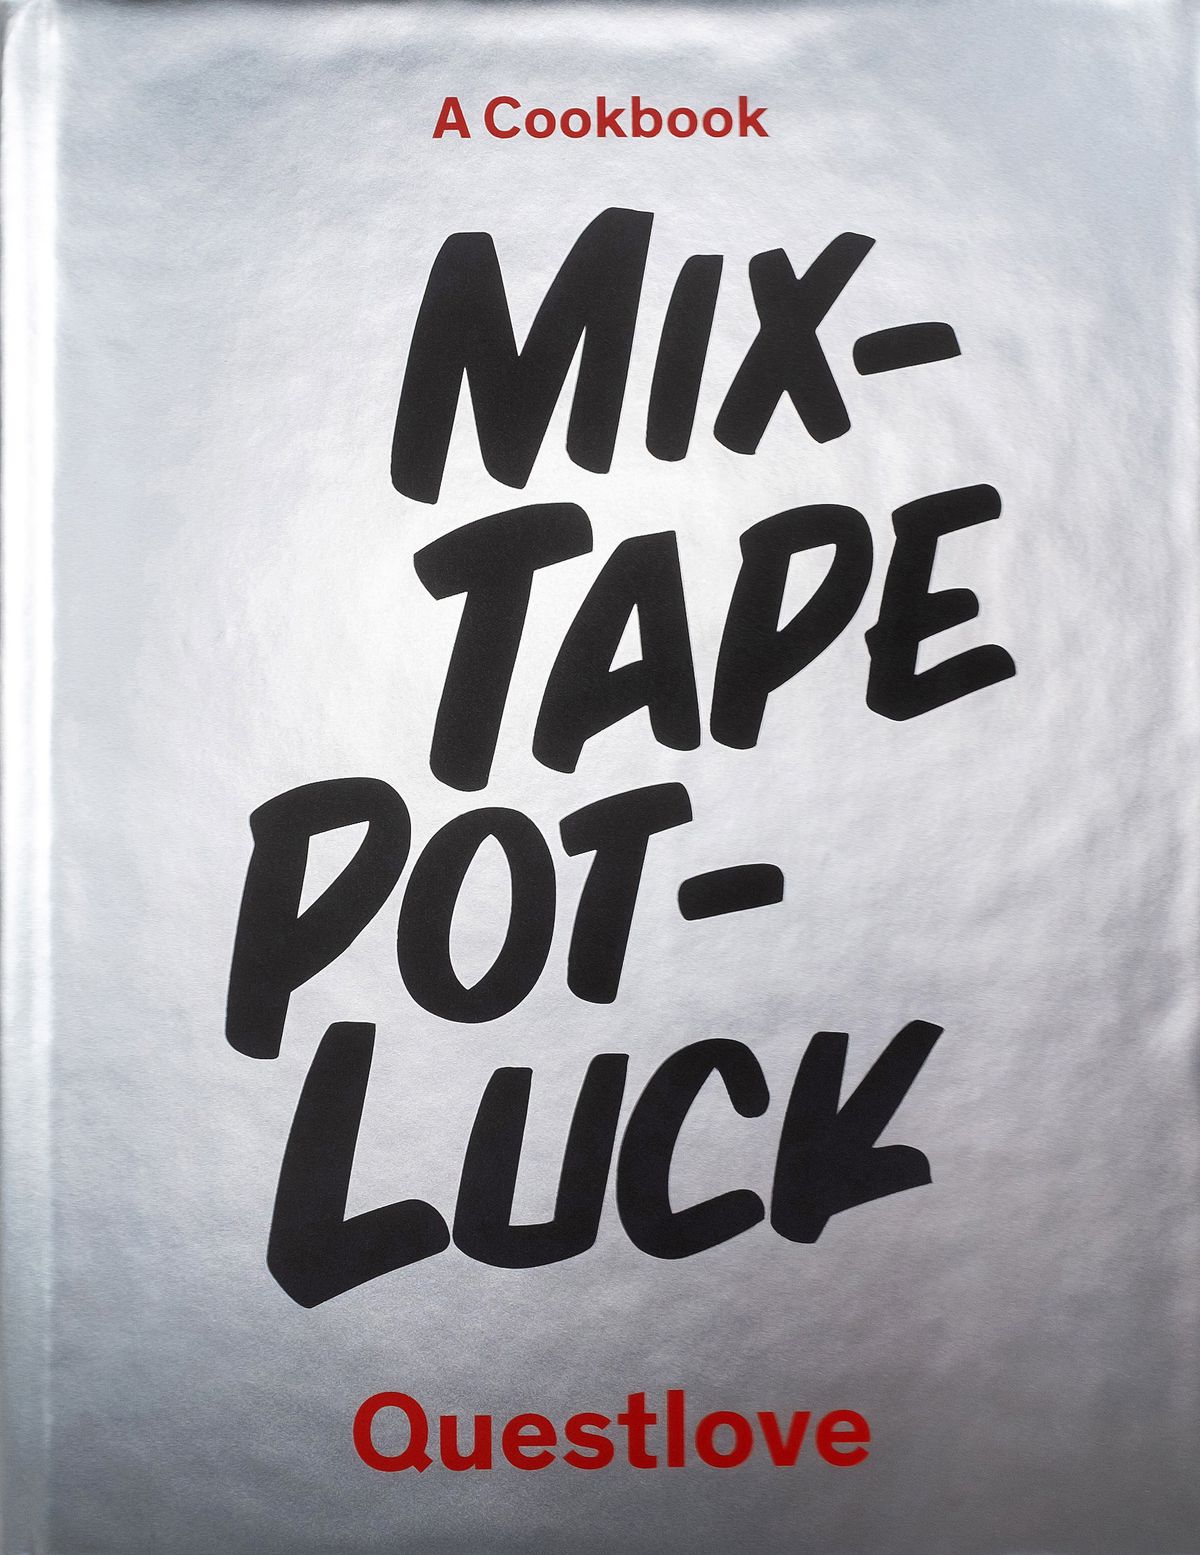 Metallic cover of “Mixtape Potluck” cookbook, with big bold black lettering and “A Cookbook” in red